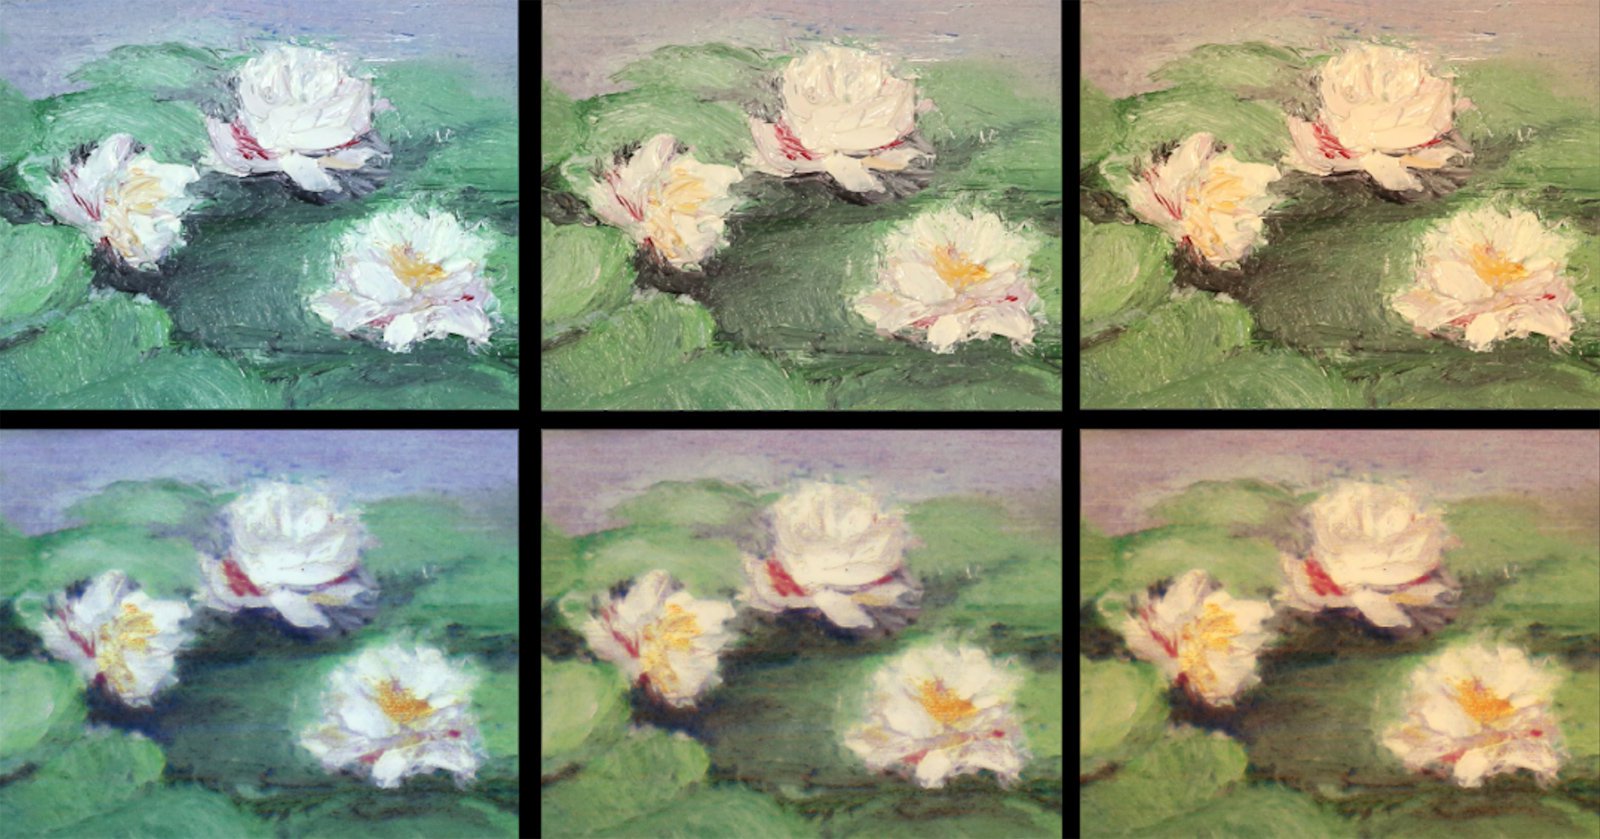 Layered 3D printing and artificial intelligence will create accurate copies of paintings